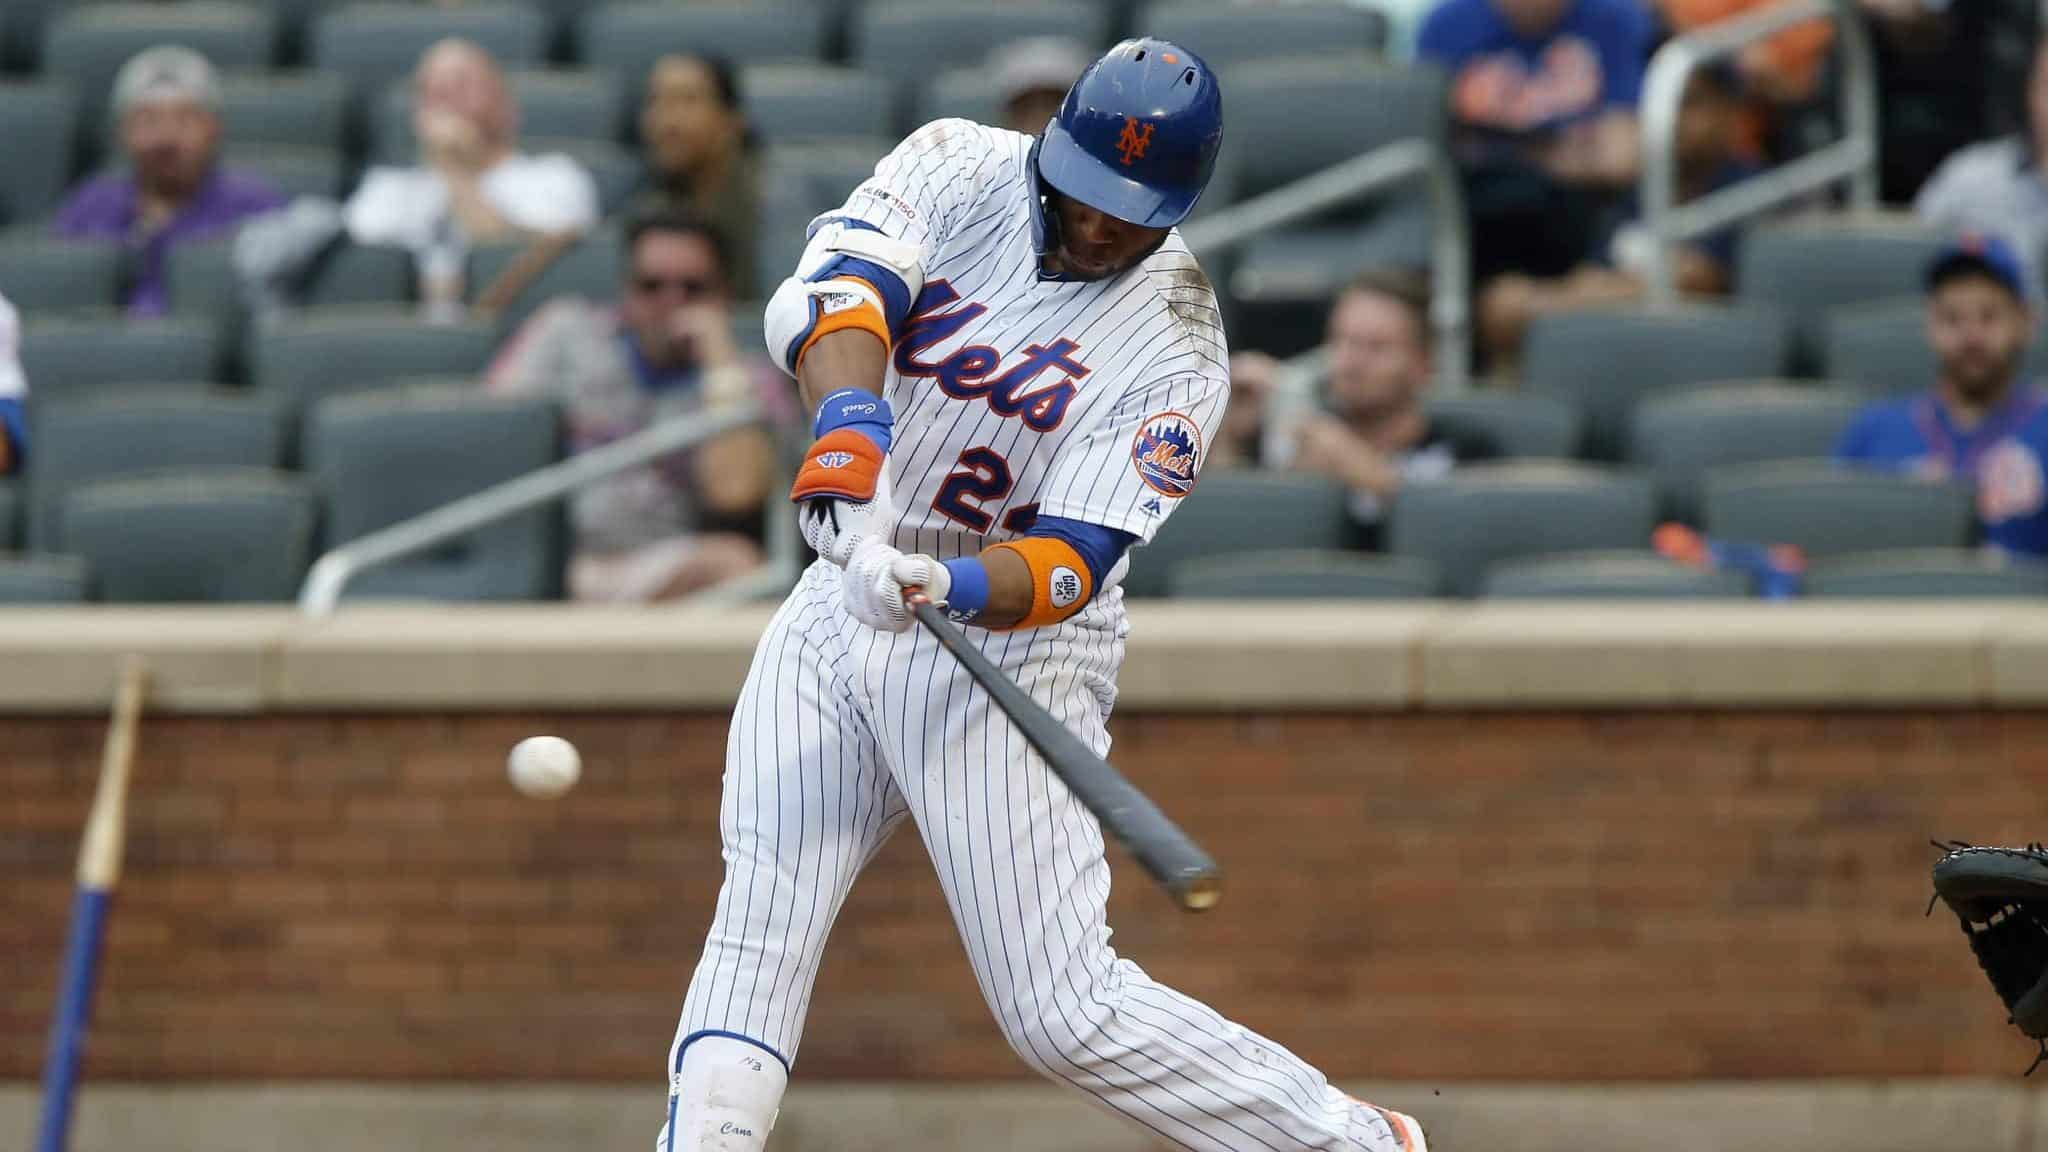 NEW YORK, NEW YORK - SEPTEMBER 12: Robinson Cano #24 of the New York Mets connects on his fifth inning home run against the Arizona Diamondbacks at Citi Field on September 12, 2019 in New York City.